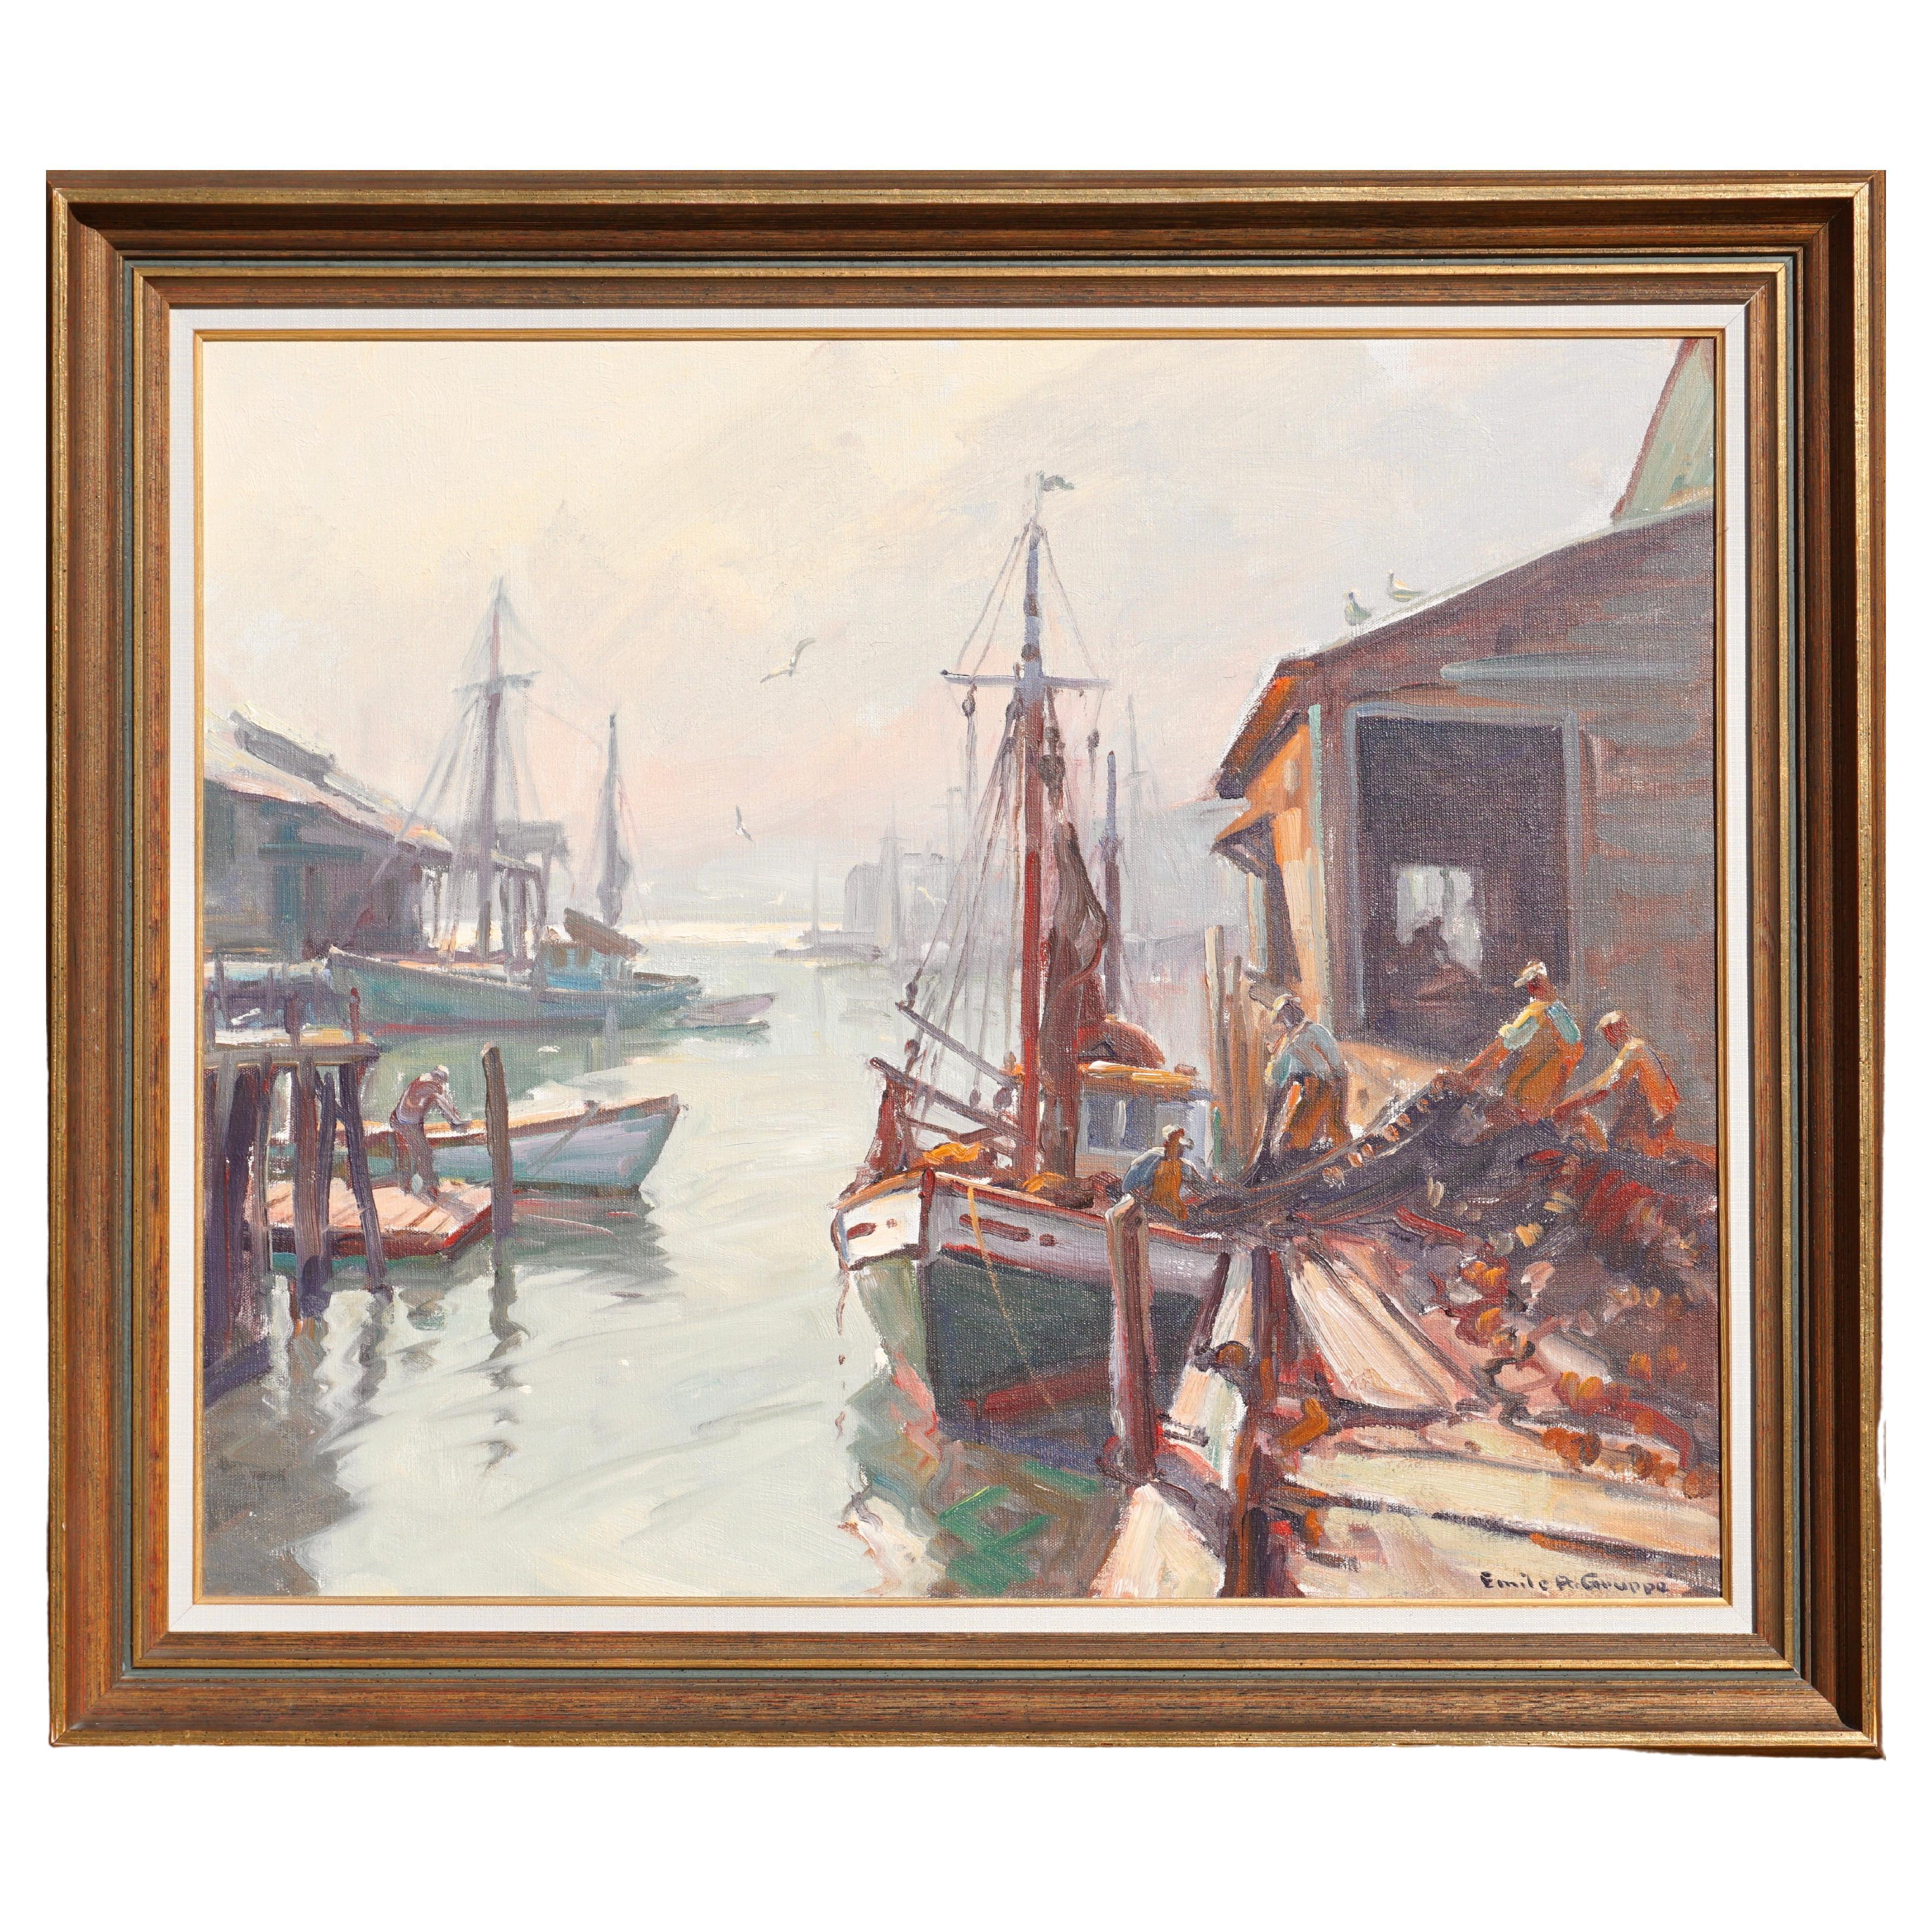 Emile Albert Gruppe (American, 1896-1978) Post Impressionist
Titled Verso: “Hauling The Nets”
Oil on canvas
Canvas: 25 x 30 inches (63.5 x 76.2 cm)
Framed Dimensions 31 X 36 Inches
Signed lower right: Emile A. Gruppe

Condition: Excellent. Original